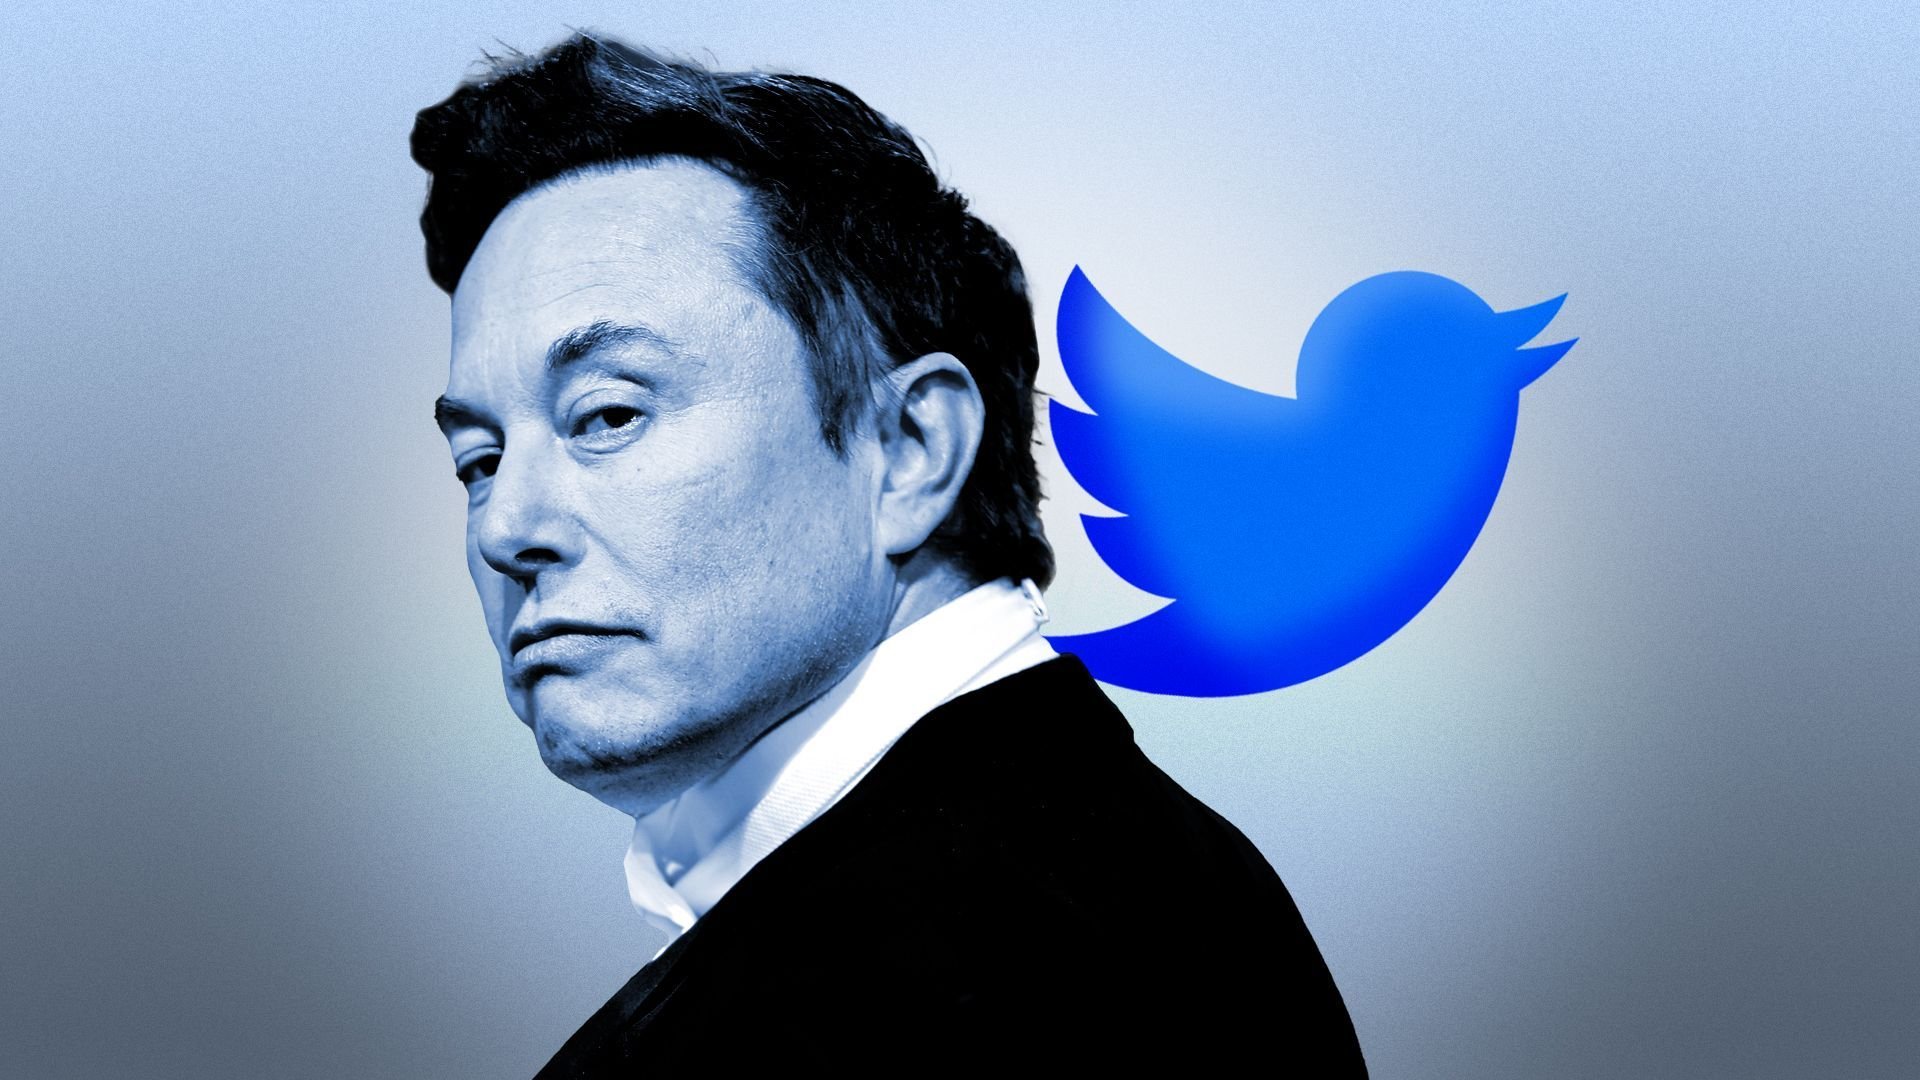 At Elon Musk's Twitter, speech is anything but free